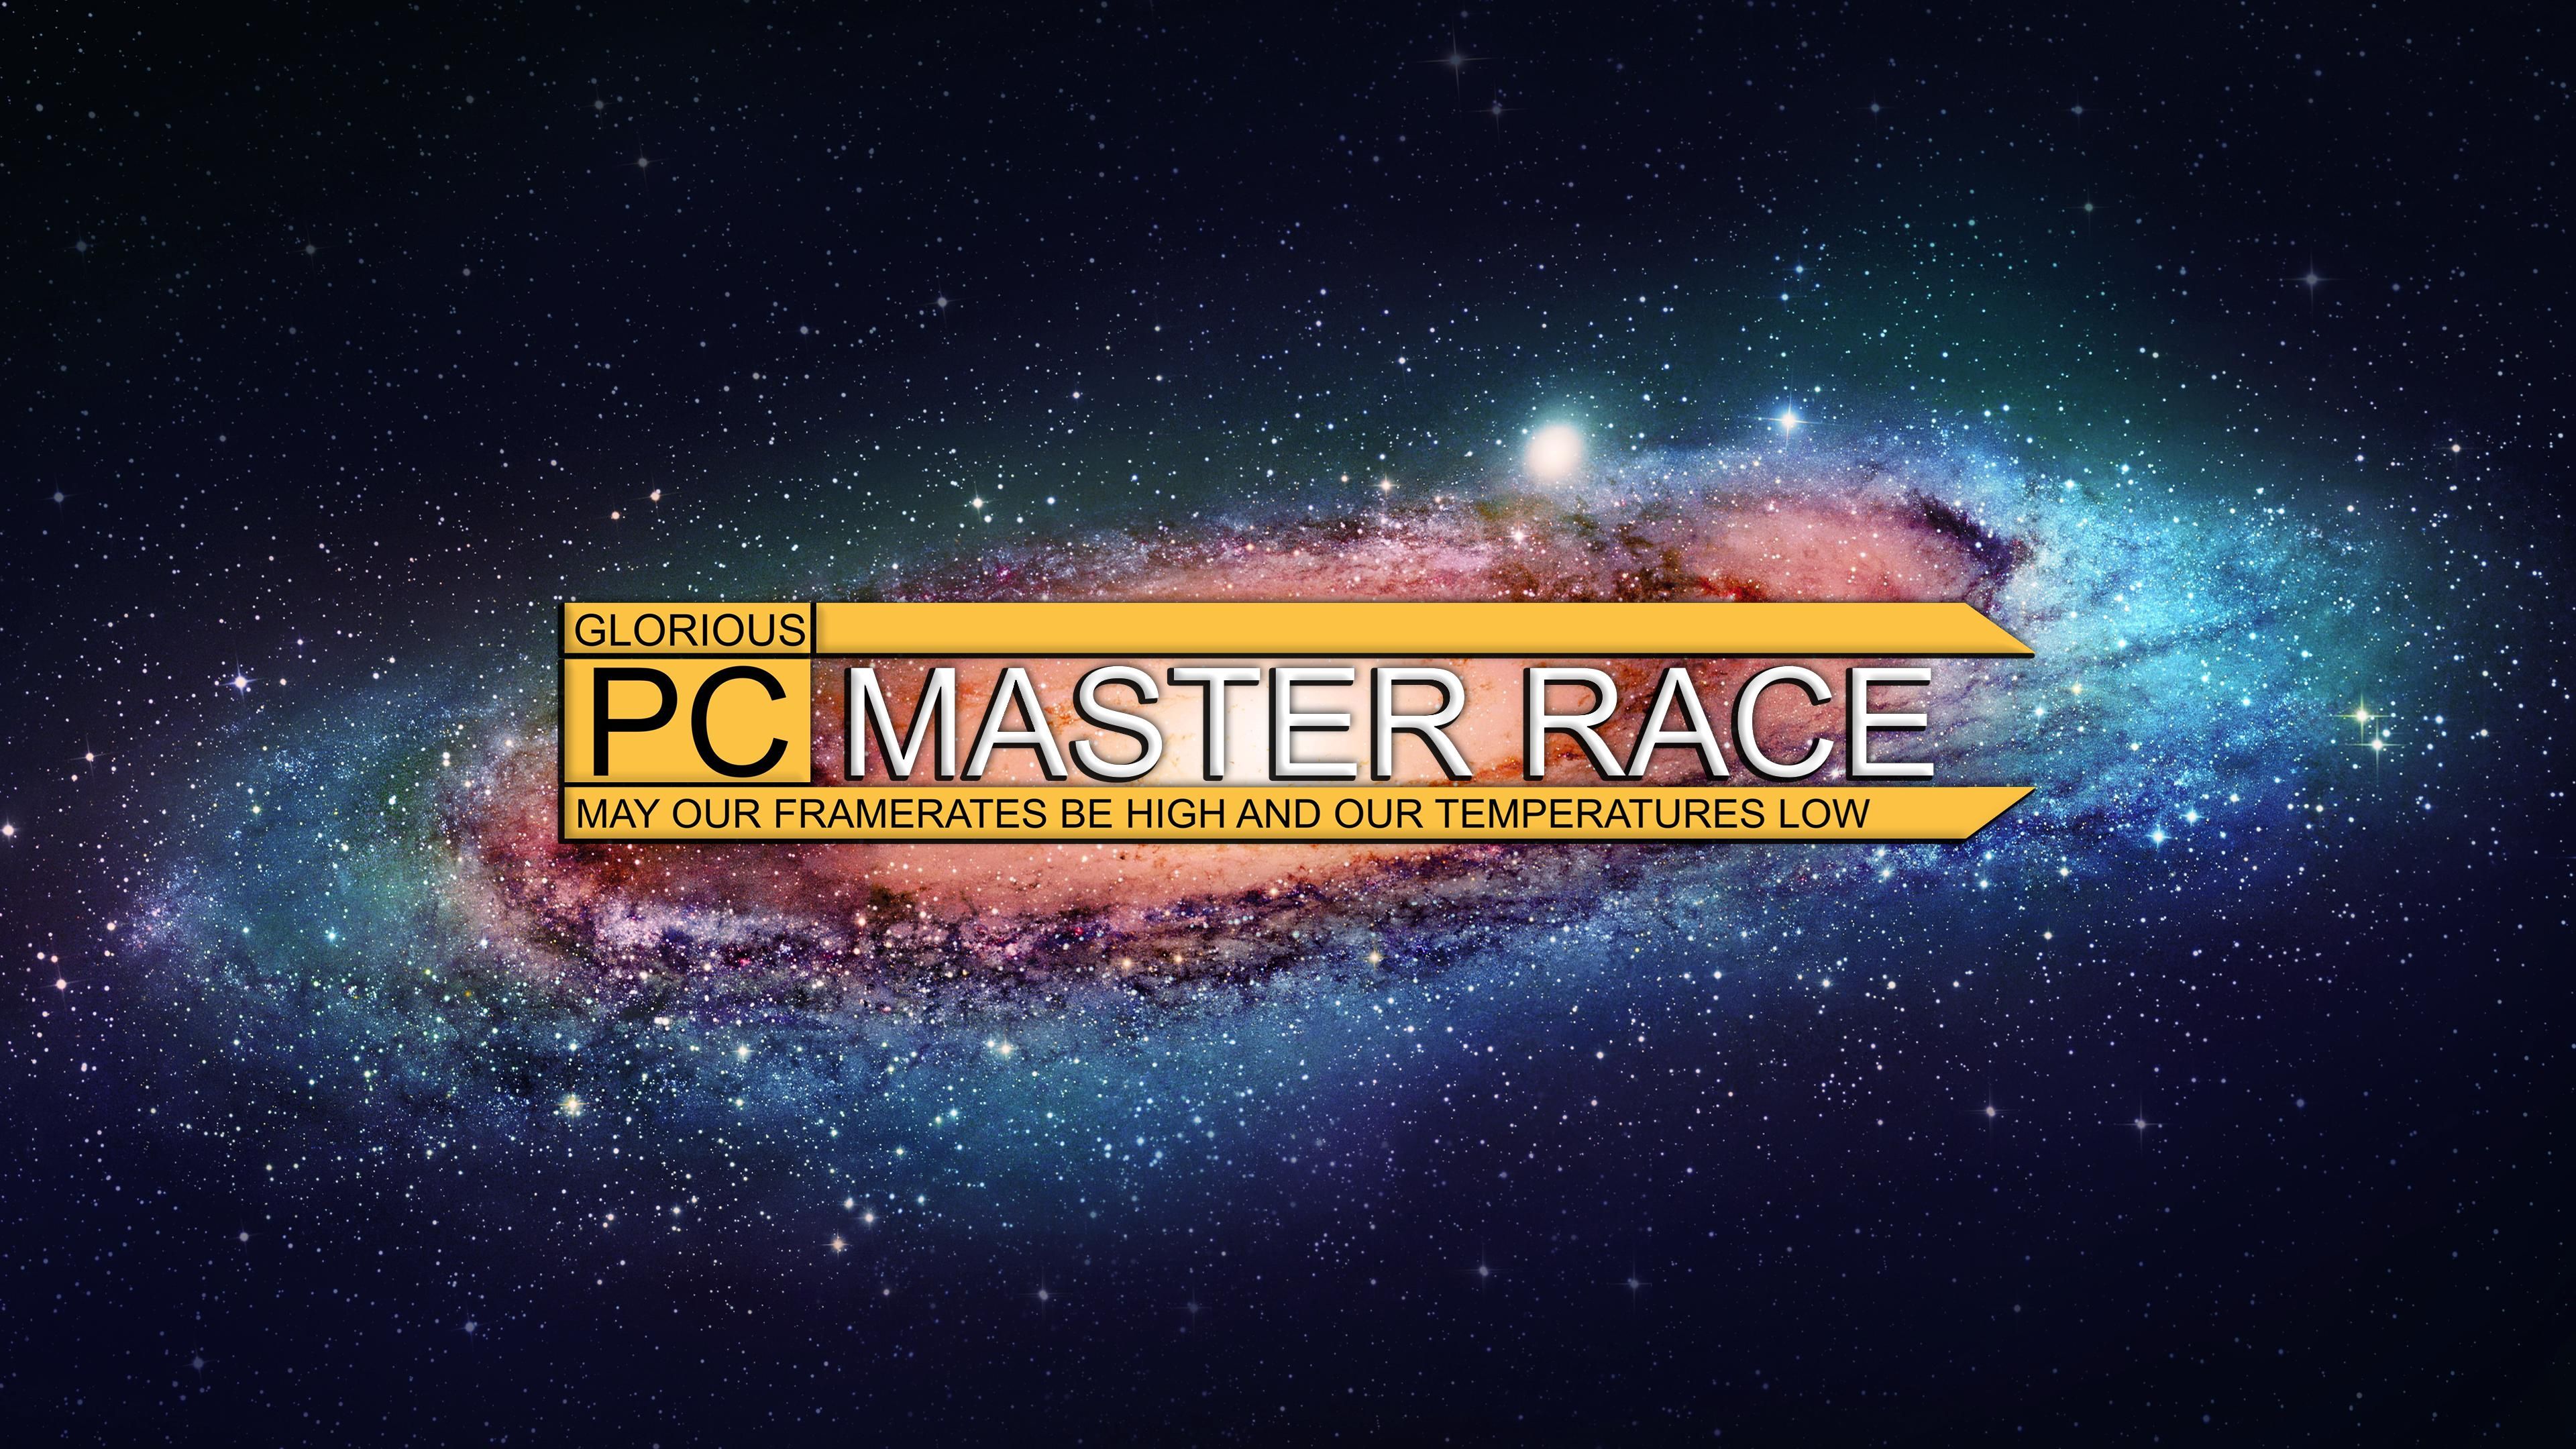 Glorious Pc Gaming Race Wallpapers